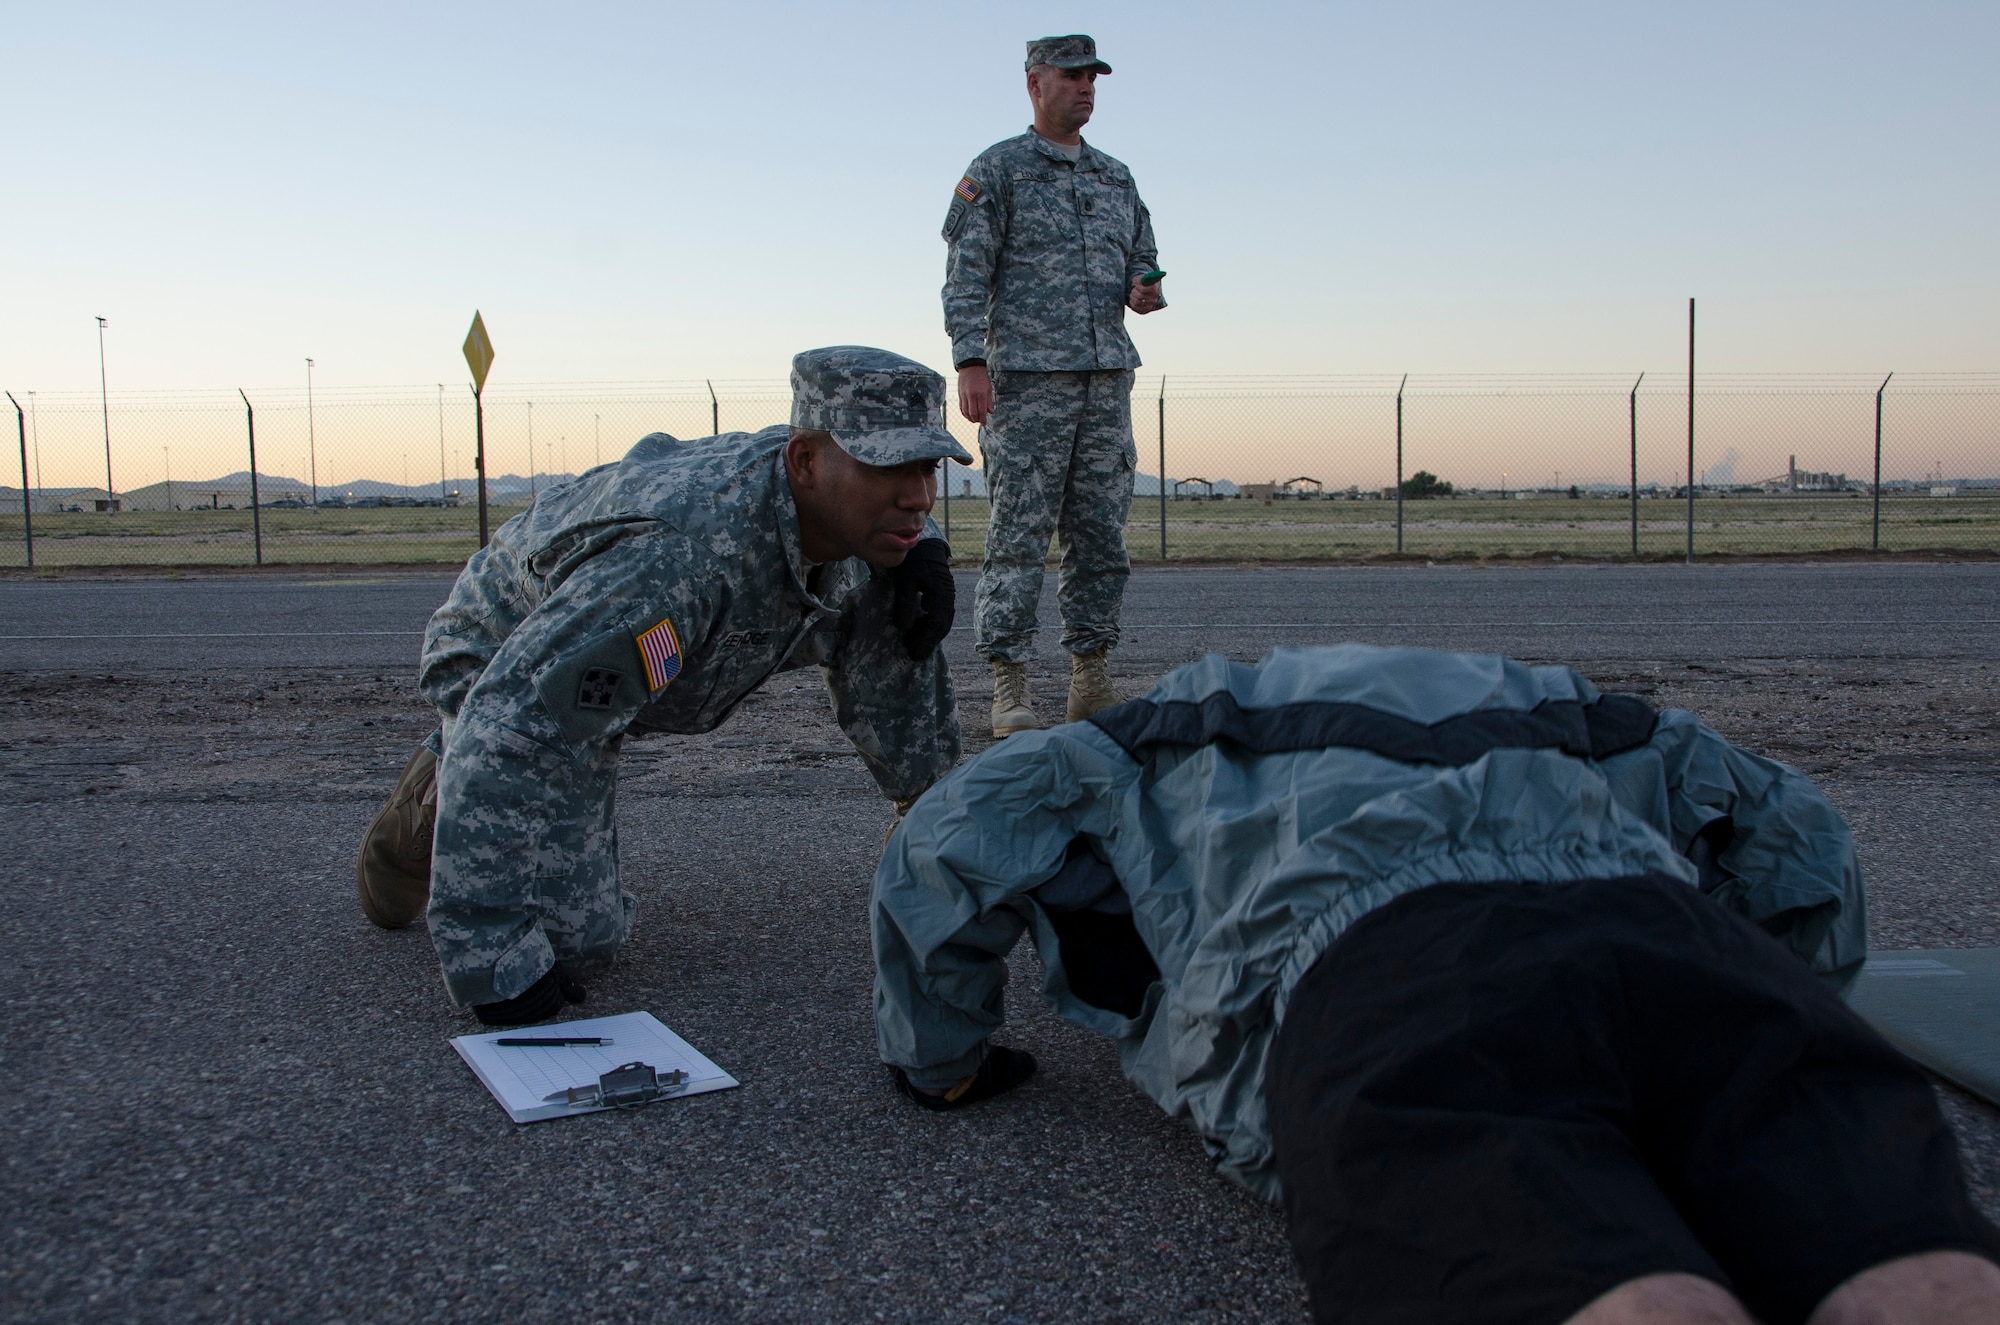 Sgt. Kelly Greenidge, 1st Battlefield Coordination Detachment Fire Support NCO, observes as a member begins the push-up portion of the Army physical fitness test at Davis-Monthan AFB, Ariz., Nov. 4, 2014. During this portion Greenidge is ensuring the member breaks a 90 degree angle, as well as telling them their current count. (U.S. Air Force photo by Staff Sgt. Adam Grant/Released)